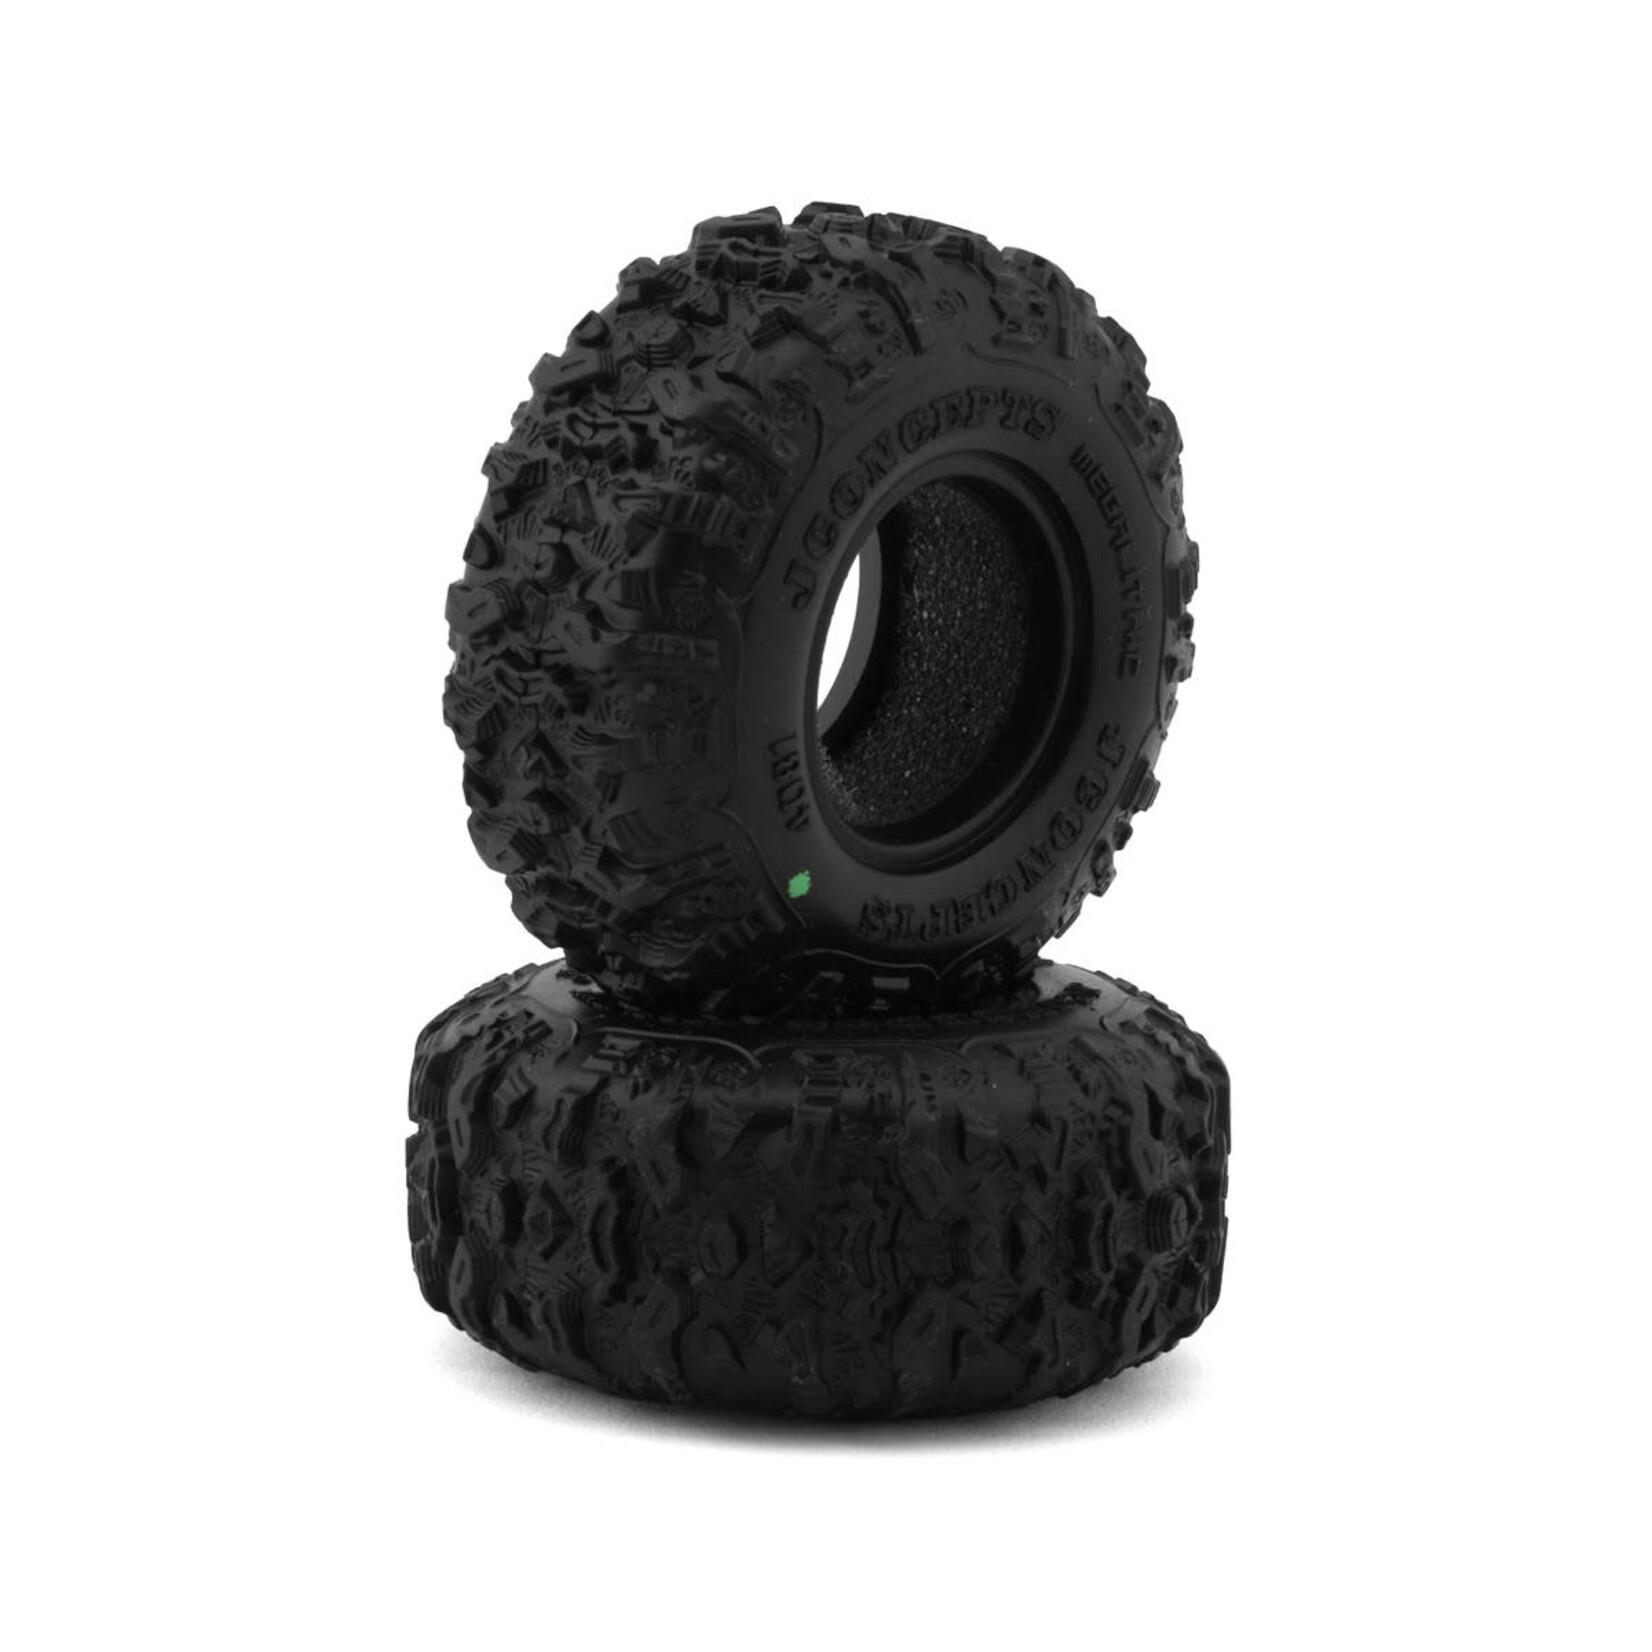 JConcepts JConcepts Megalithic 1.0" Micro Crawler Tires (2) (57mm OD) (Green) #4081-02